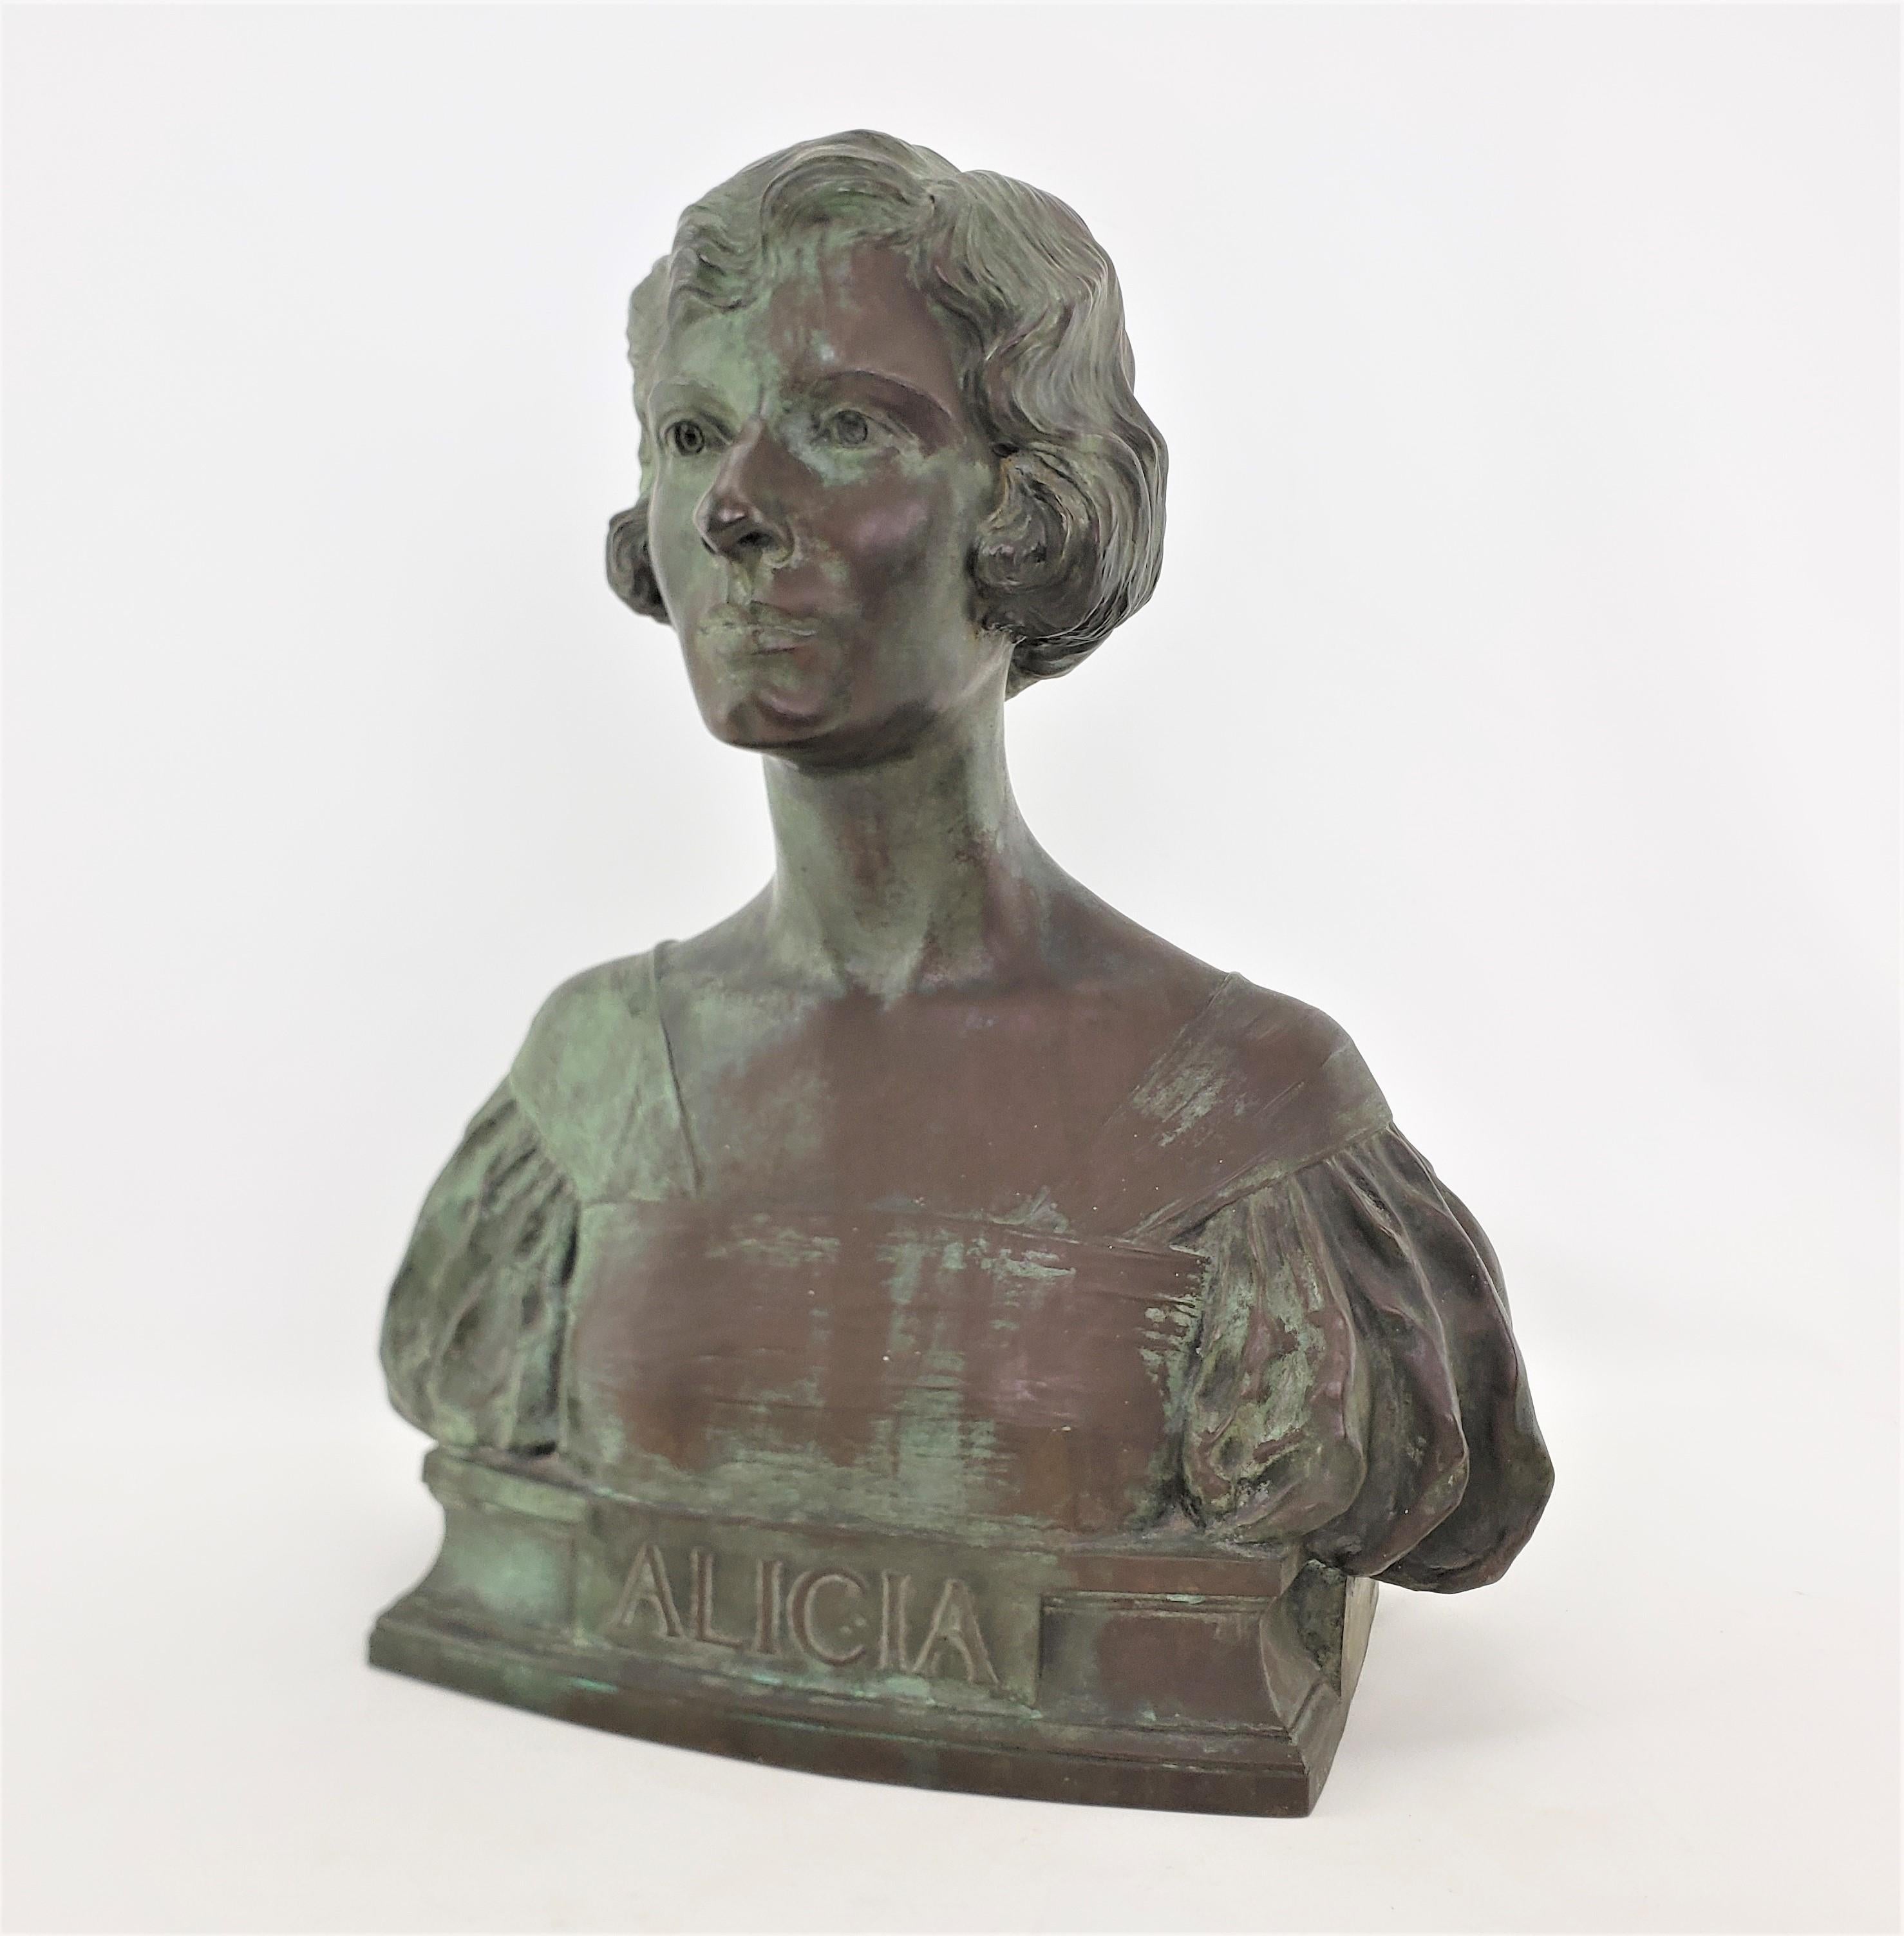 This extremely well executed antique bronze bust was done by world renowned sculptor Percy Bryant Barker of the United States and dates to 1922 and done in the period Art Deco style. The bust is composed of cast bronze with a 'verdigris' patination,